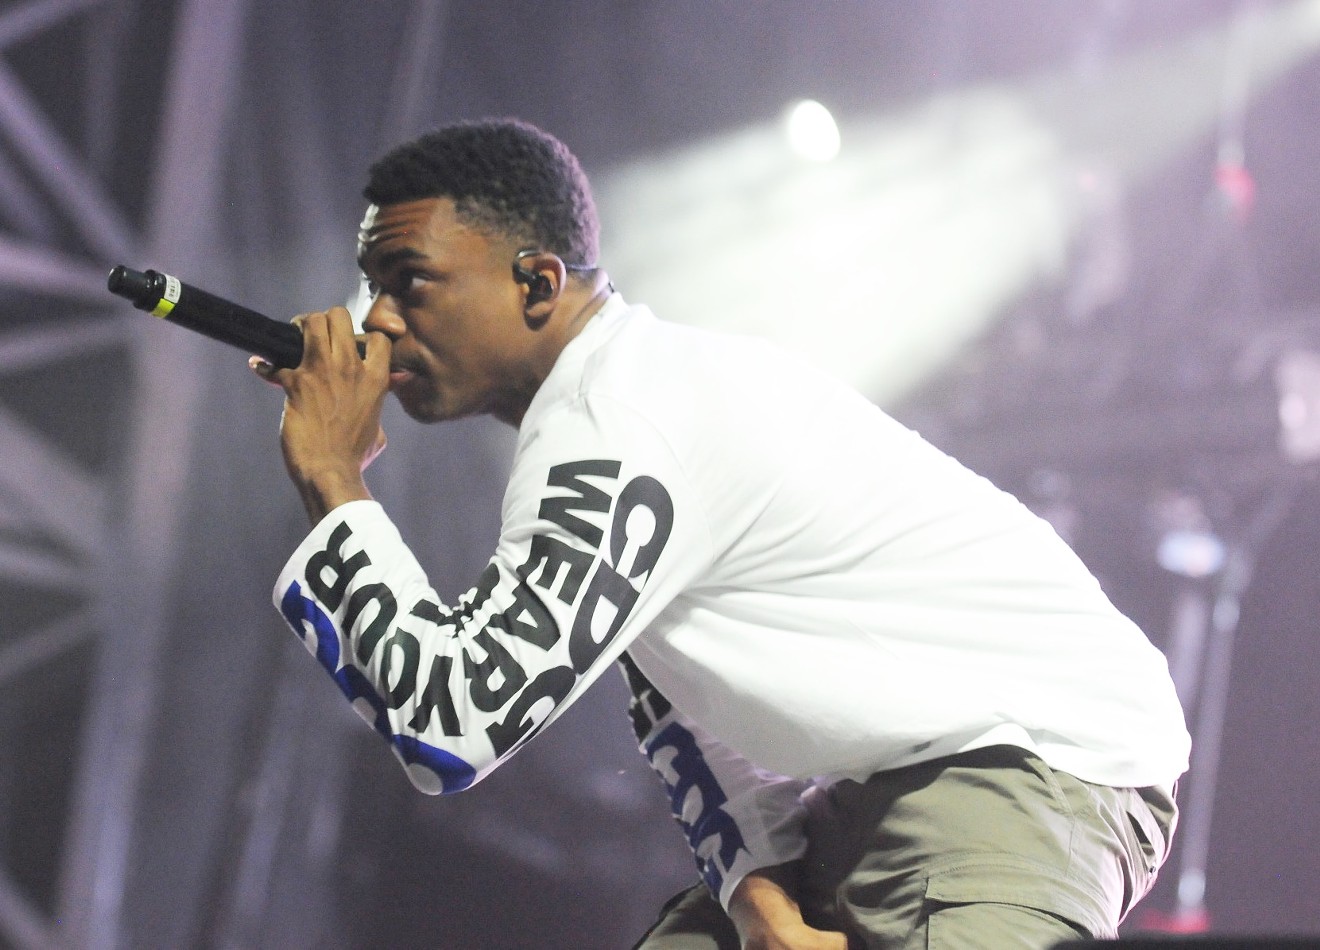 Vince Staples performs during the first night of the Goldrush Music Festival.